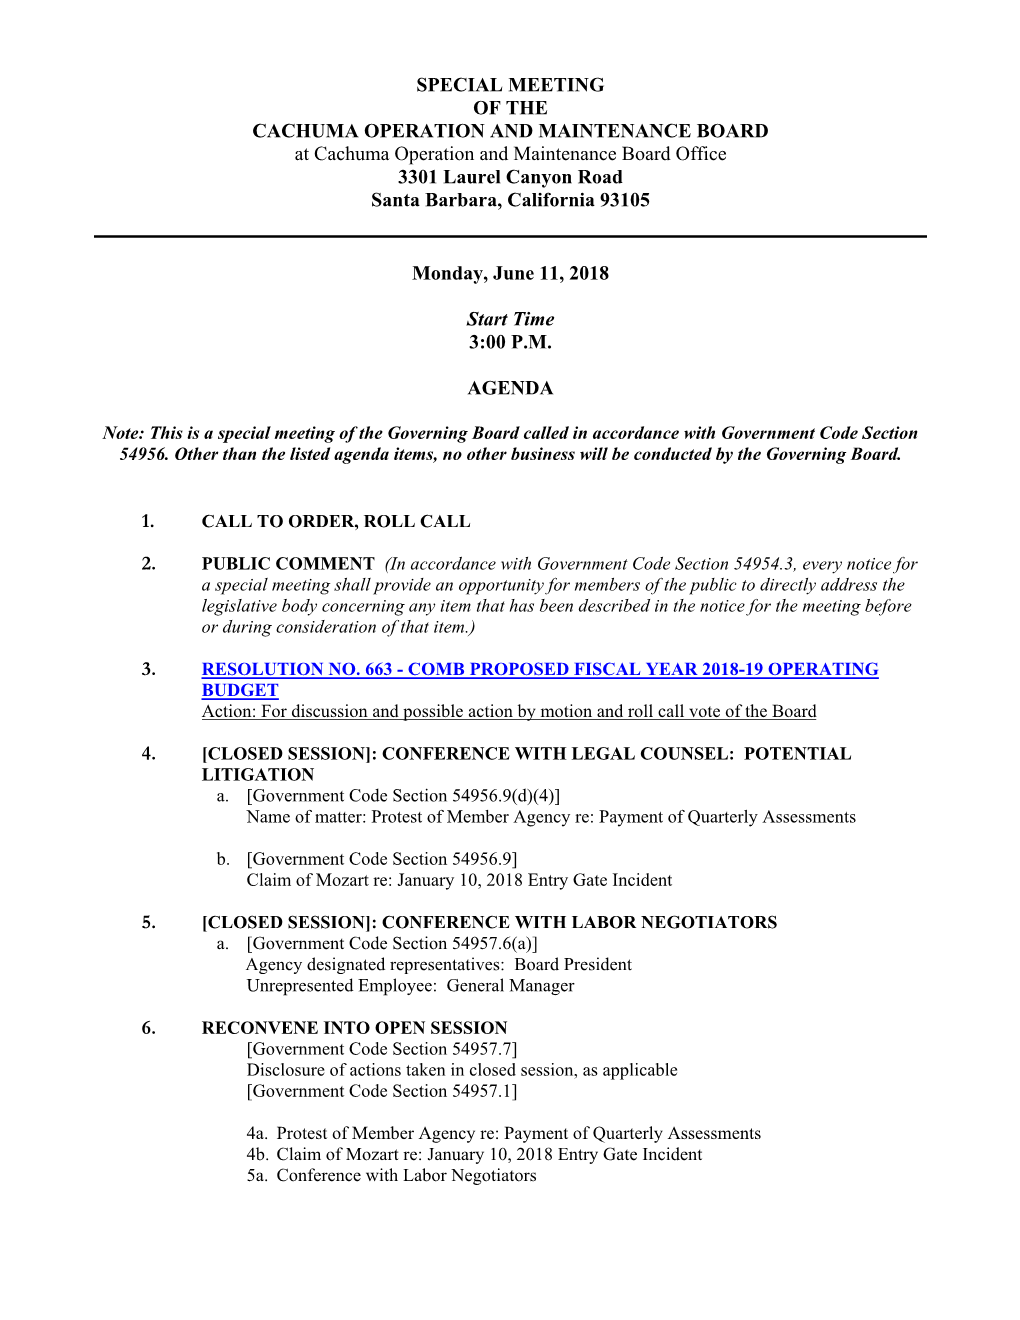 2018-06-11 Special Board Meeting Packet.Pdf